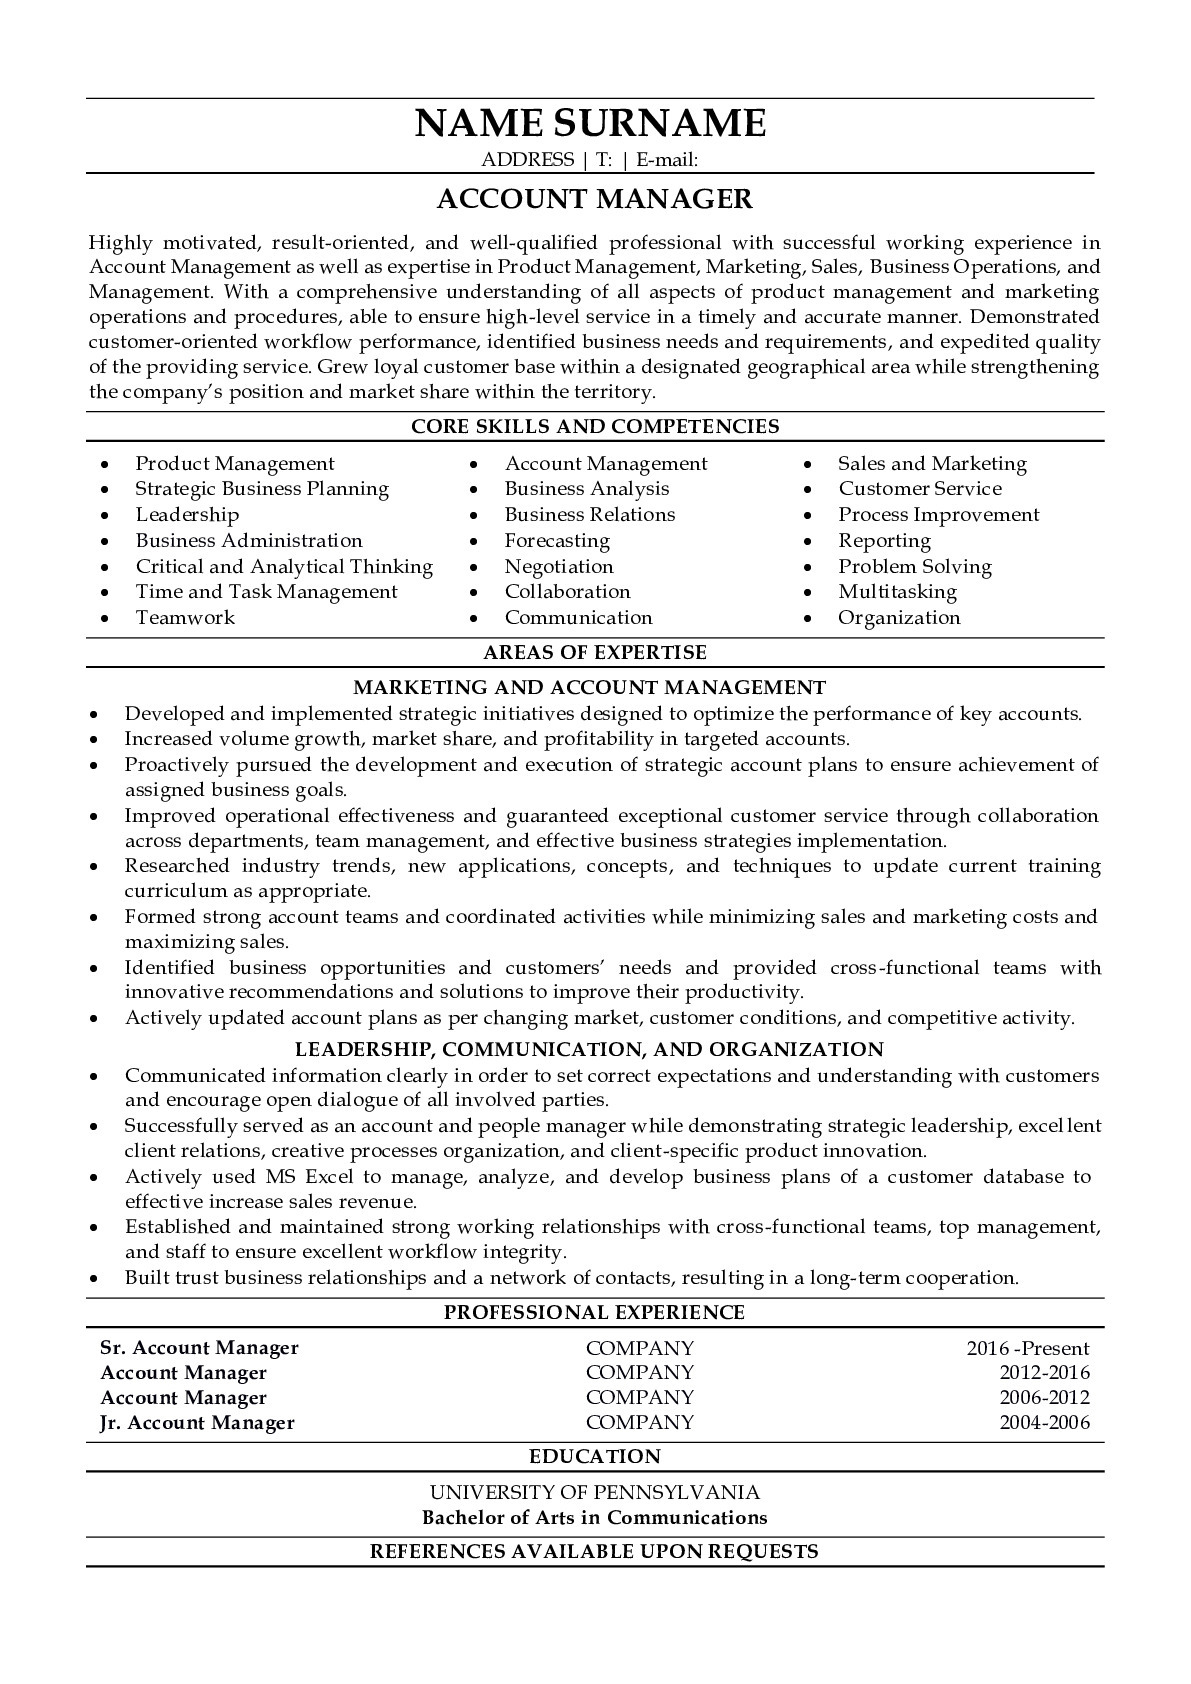 Resume Example for Account Manager